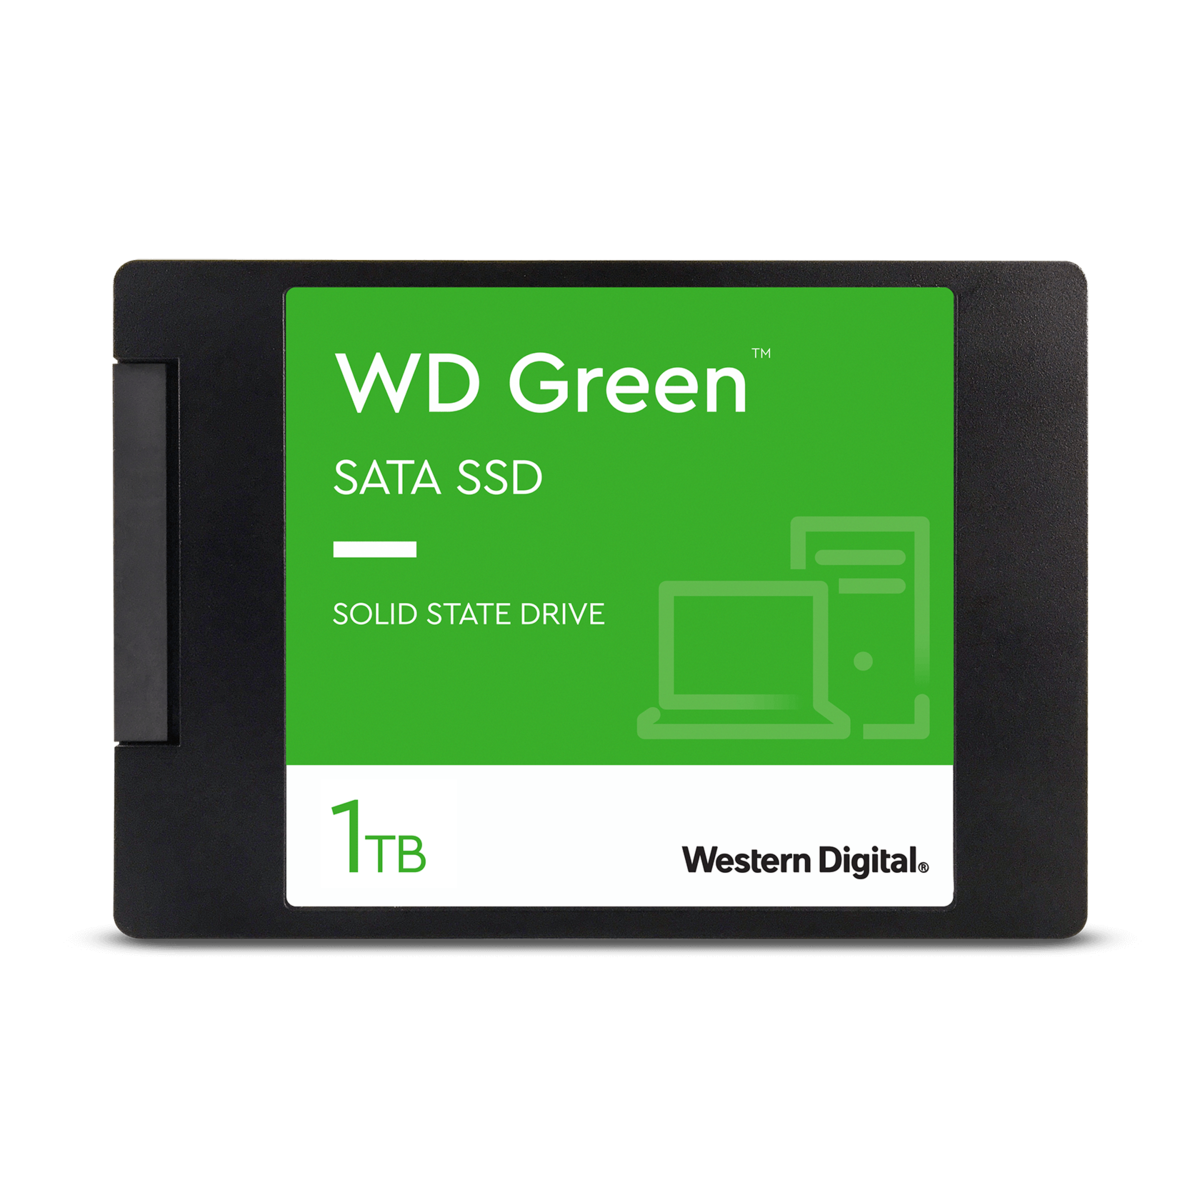 slide 1 of 3, show larger image, wd green ssd 2.5"/7mm 1tb